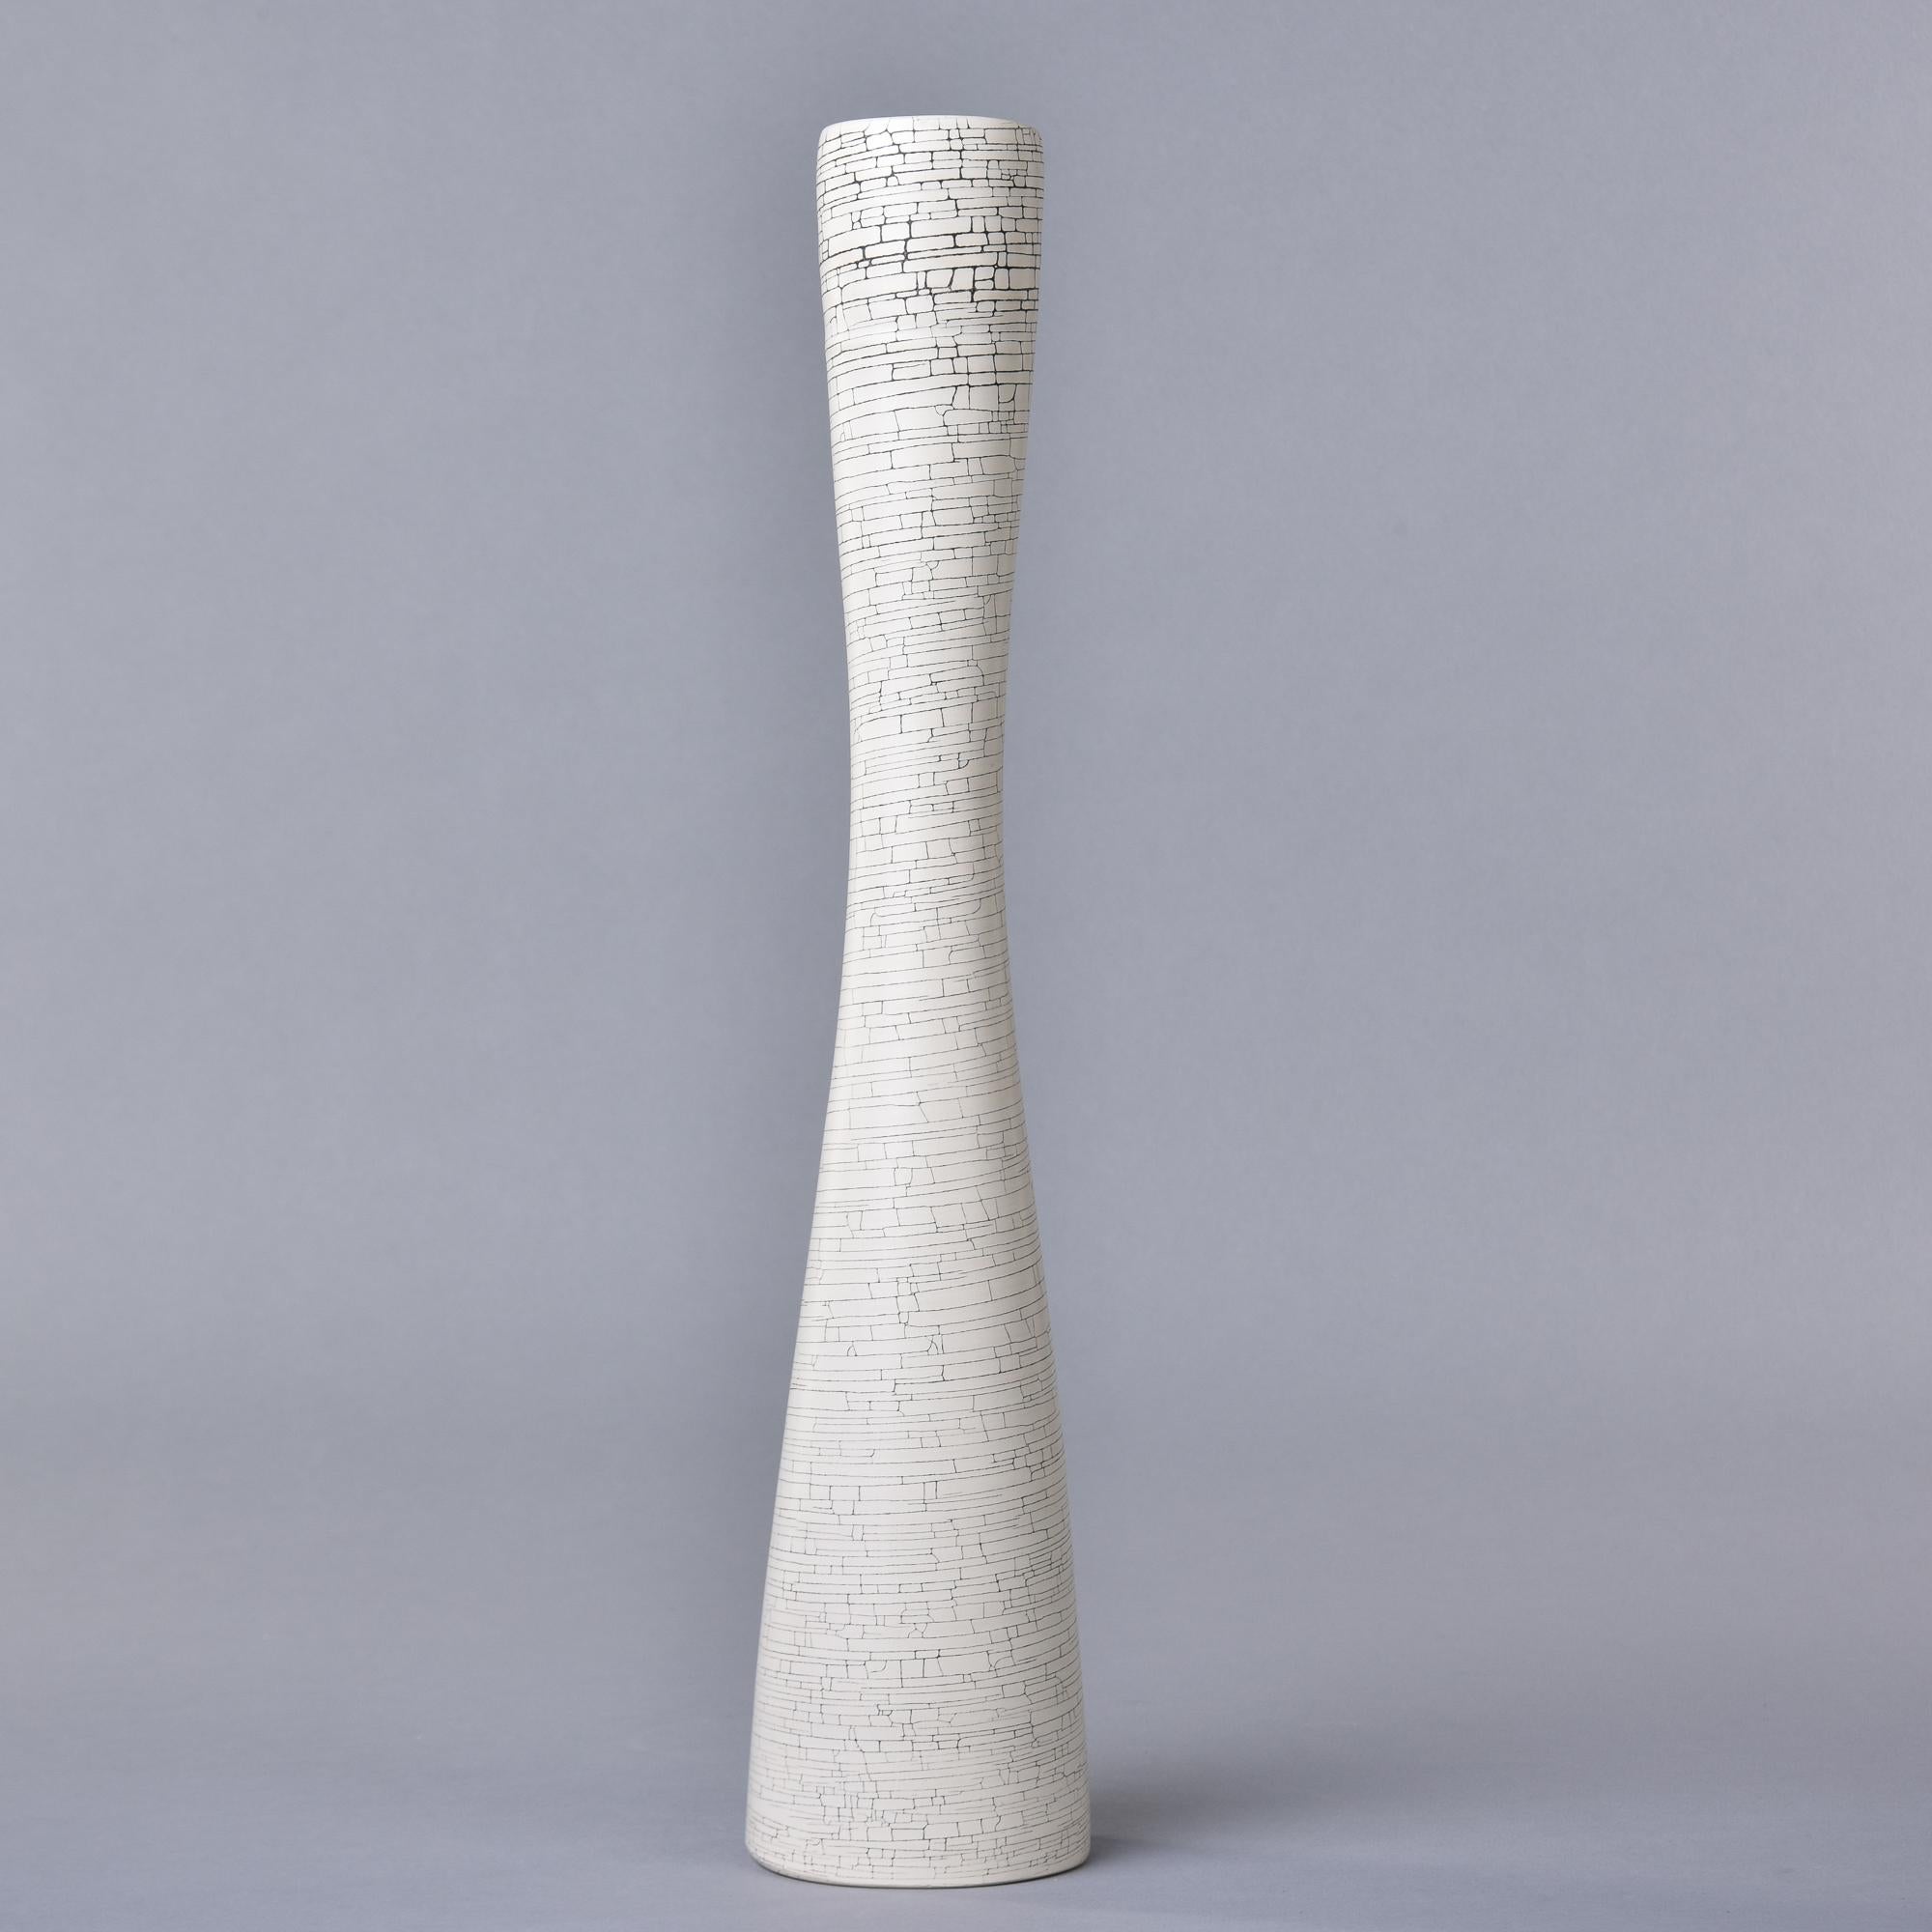 New and made in Italy by Rina Menardi, this tall slender vase is 18” high and has a white crackled glaze. Inside has a contrasting soft black wash. Other colors and shape from this maker available.